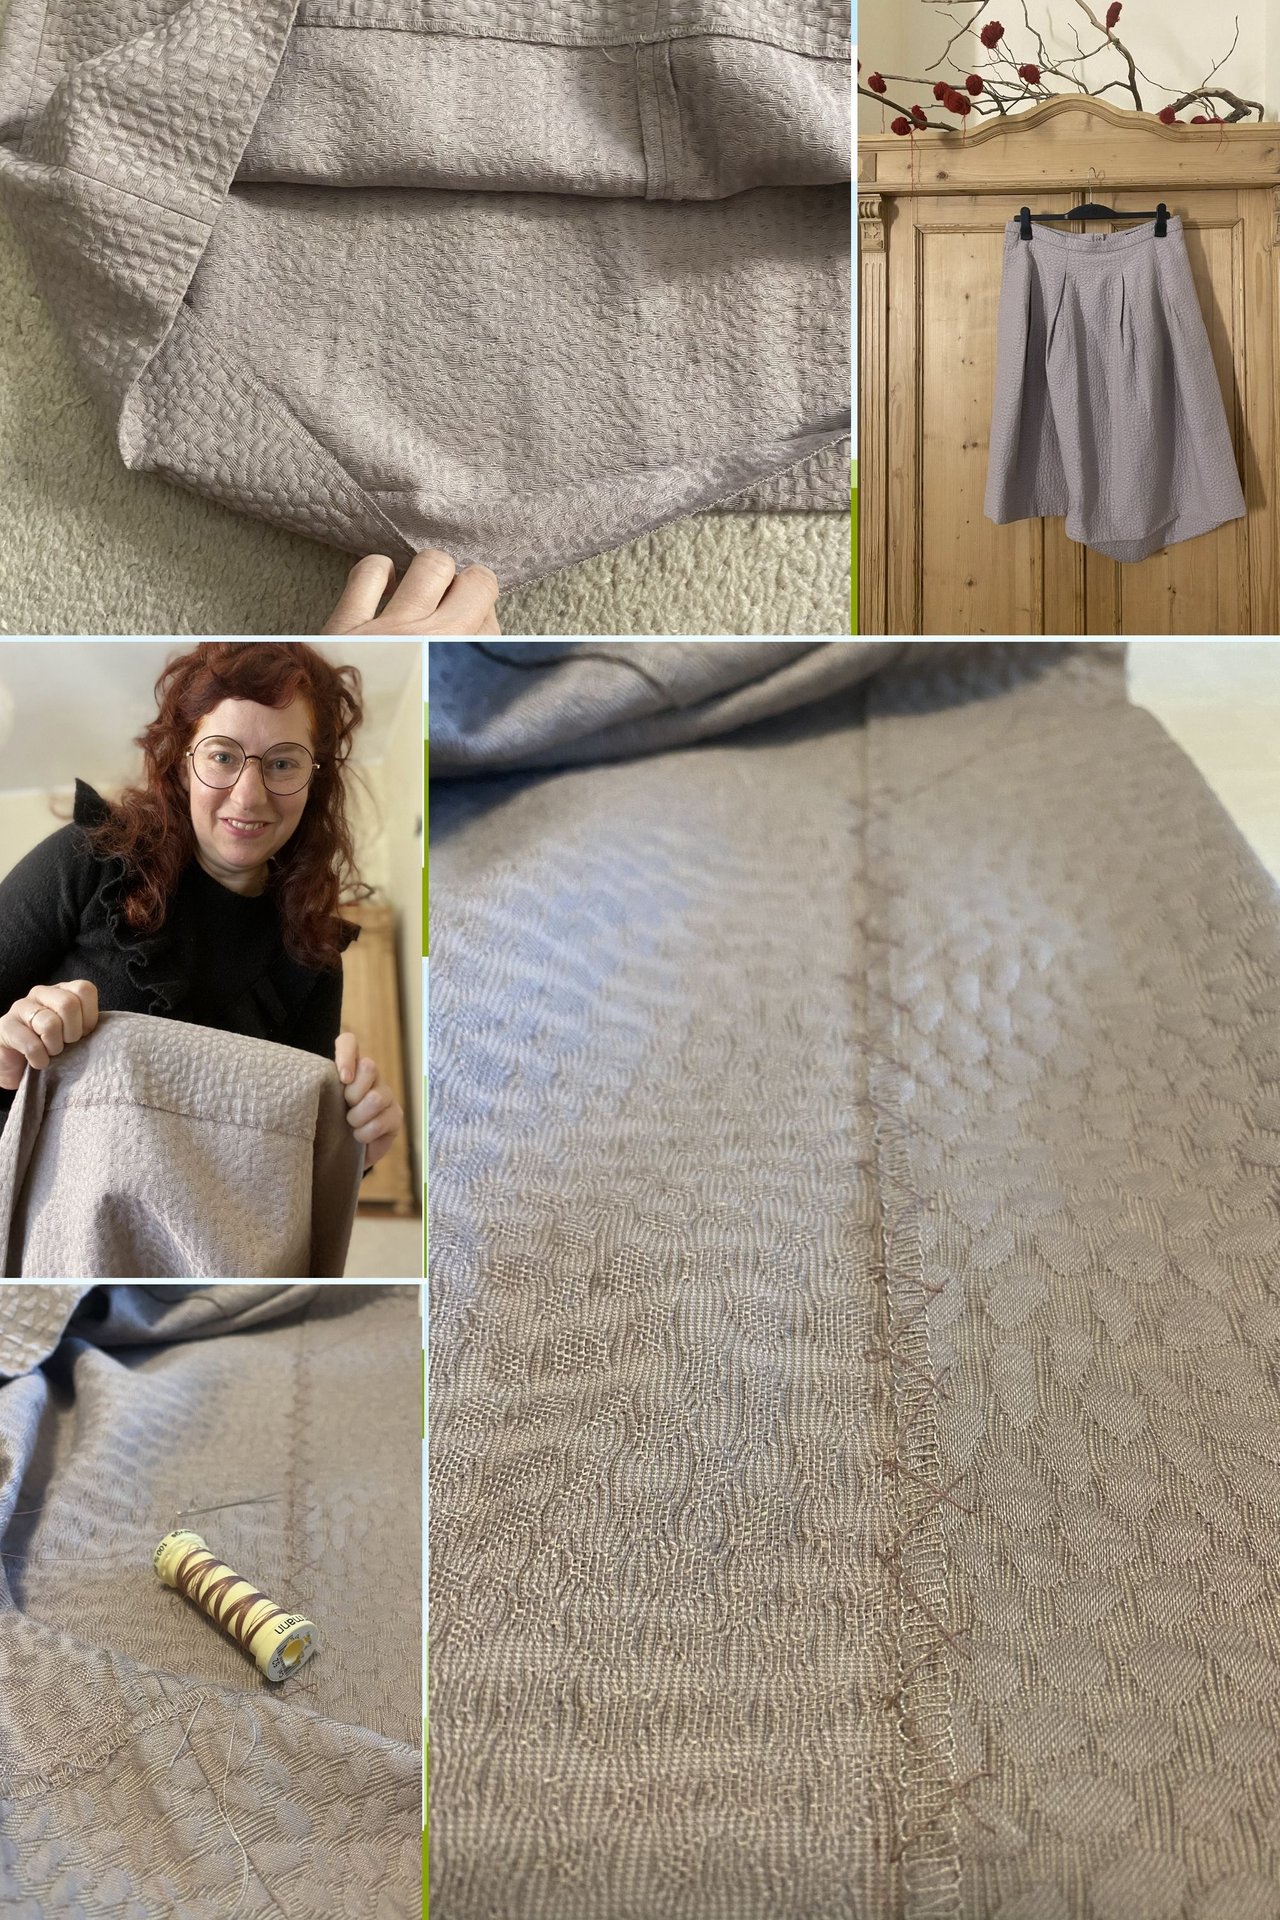 several photos of the mending process of a ripped skirt hem